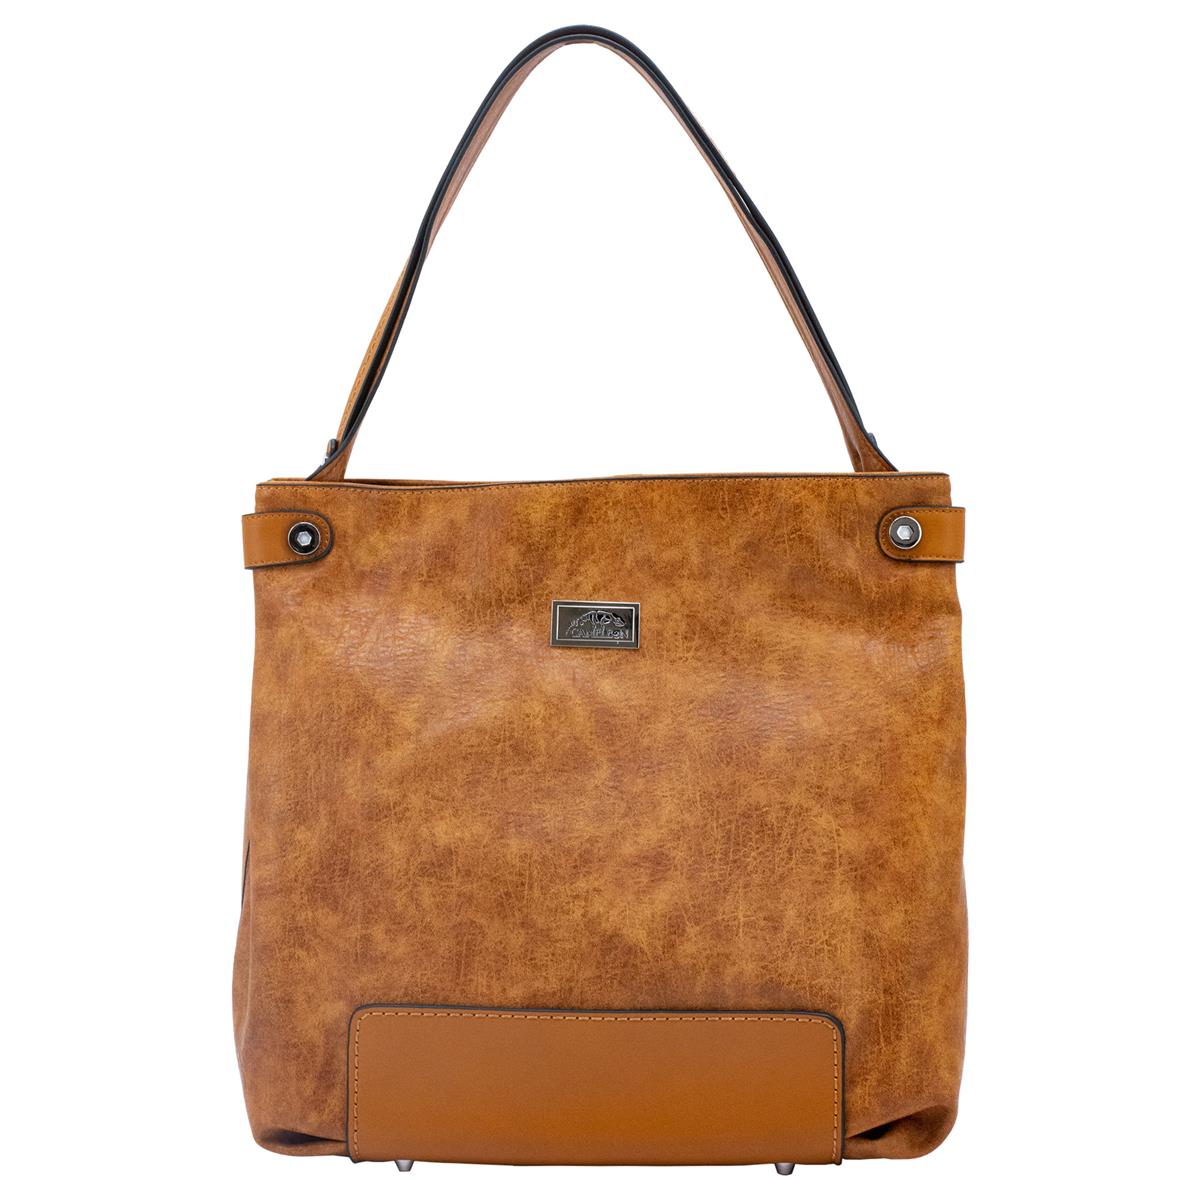 Image of Cameleon Lynx Shoulder Handbag with Concealed Carry Compartment